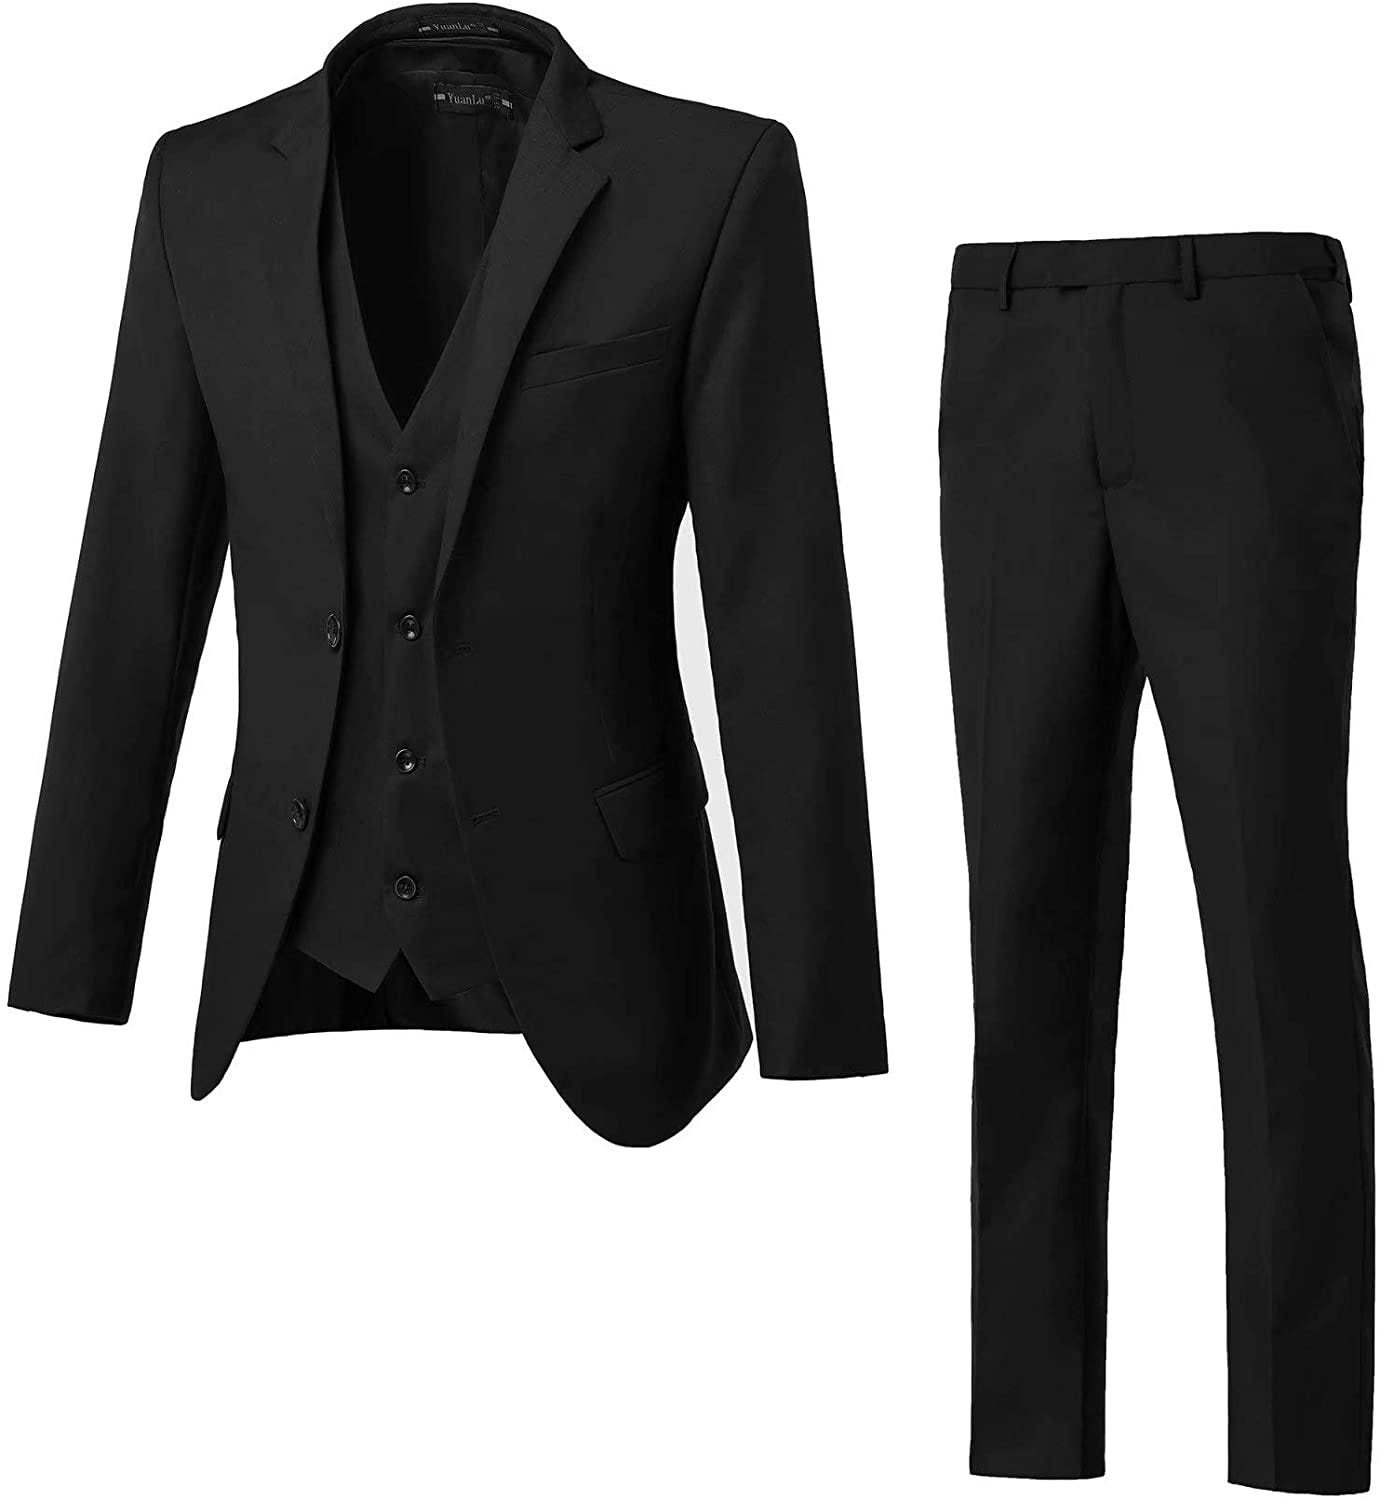 Men's Black Suit:What To Consider In That?